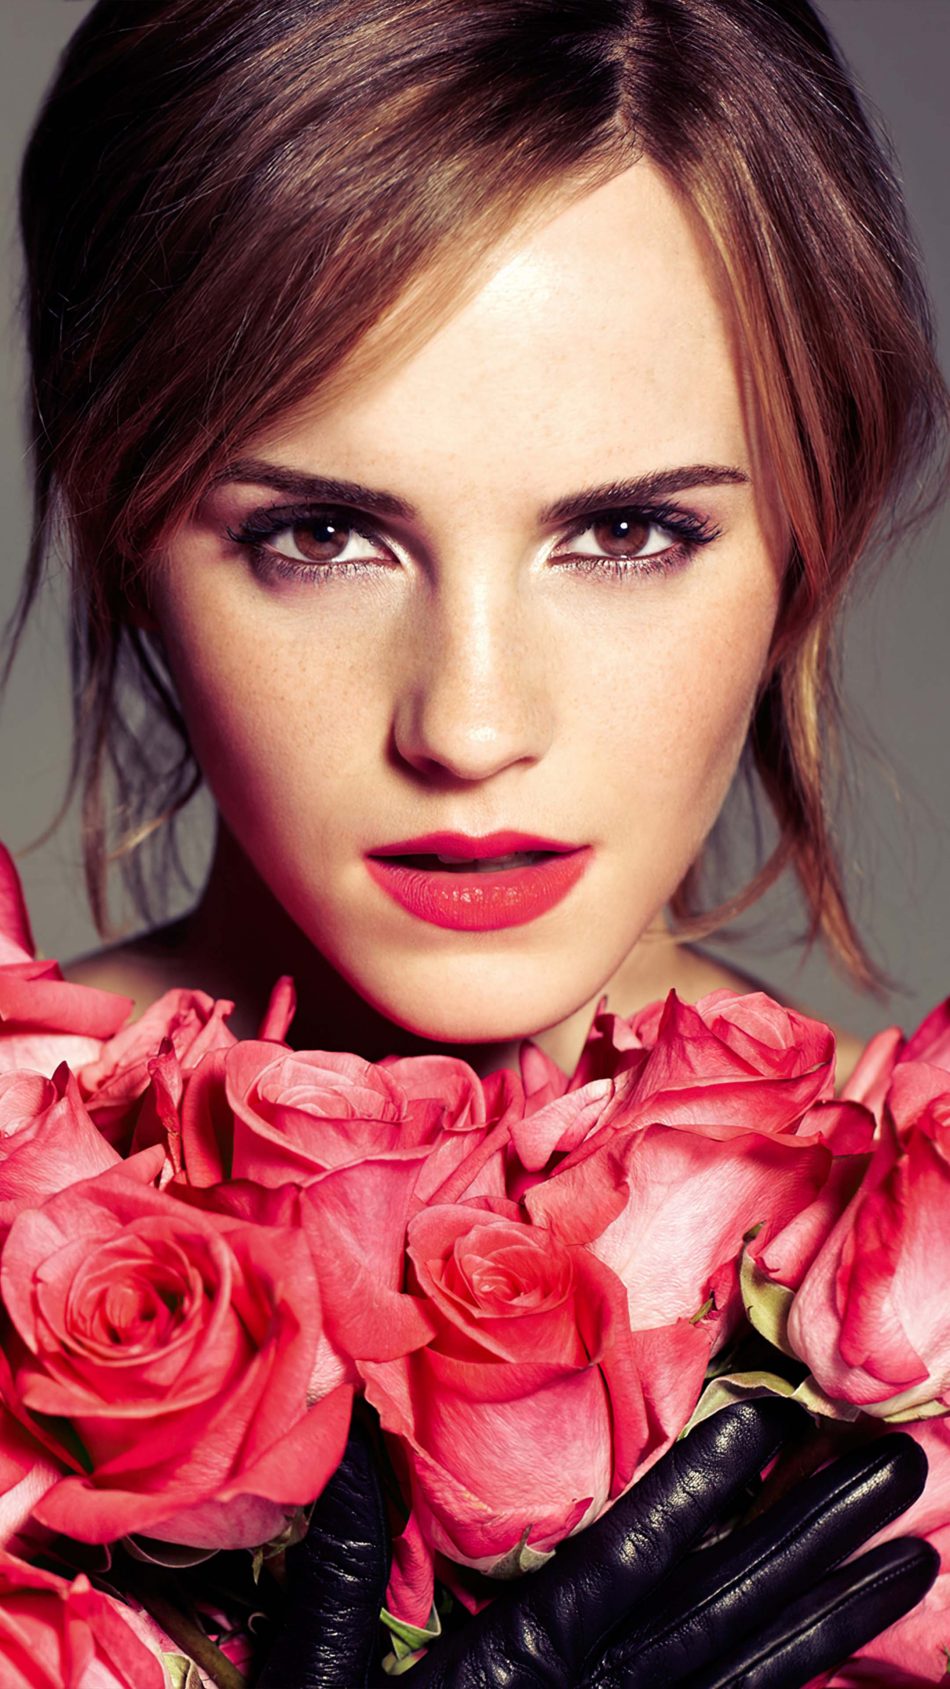 Emma Watson With Red Roses 4K Ultra HD Mobile Wallpaper